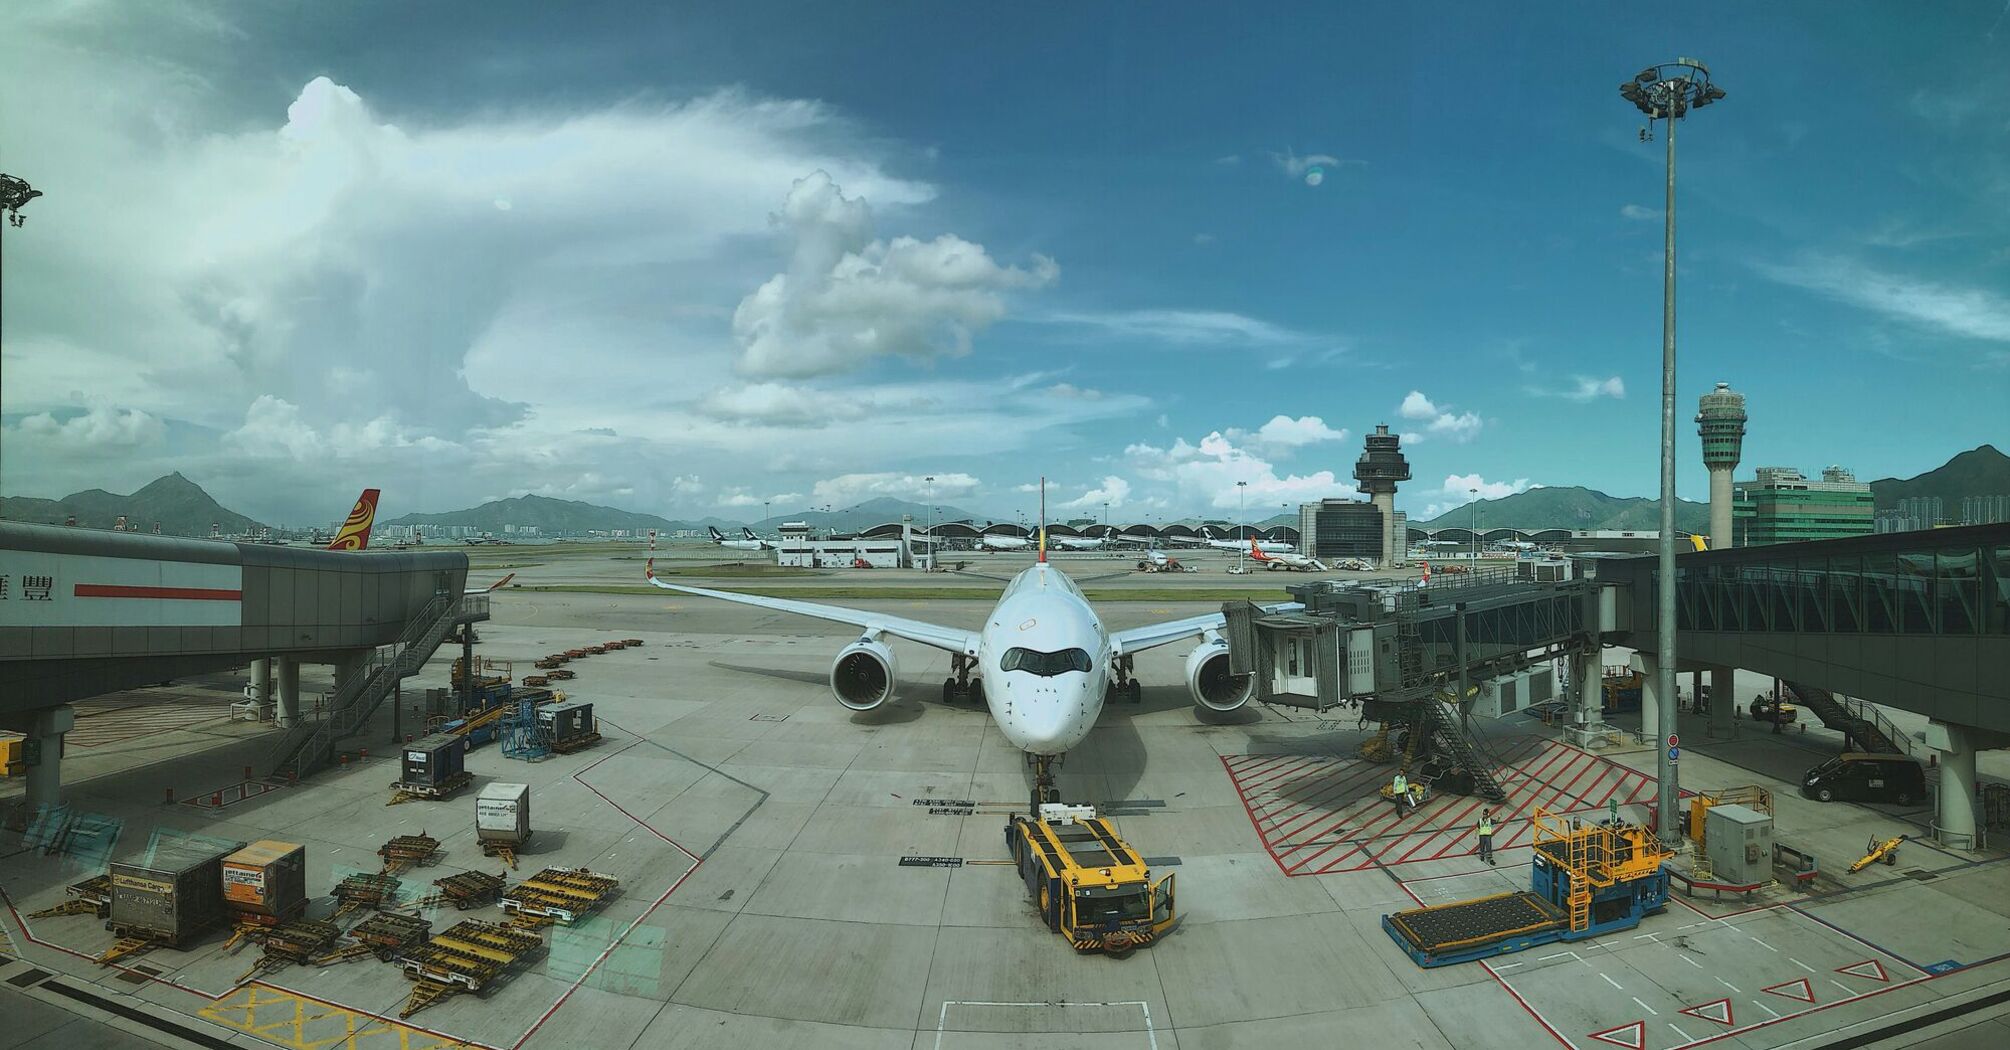 scenery of white airplane landed on Hong Kong airport